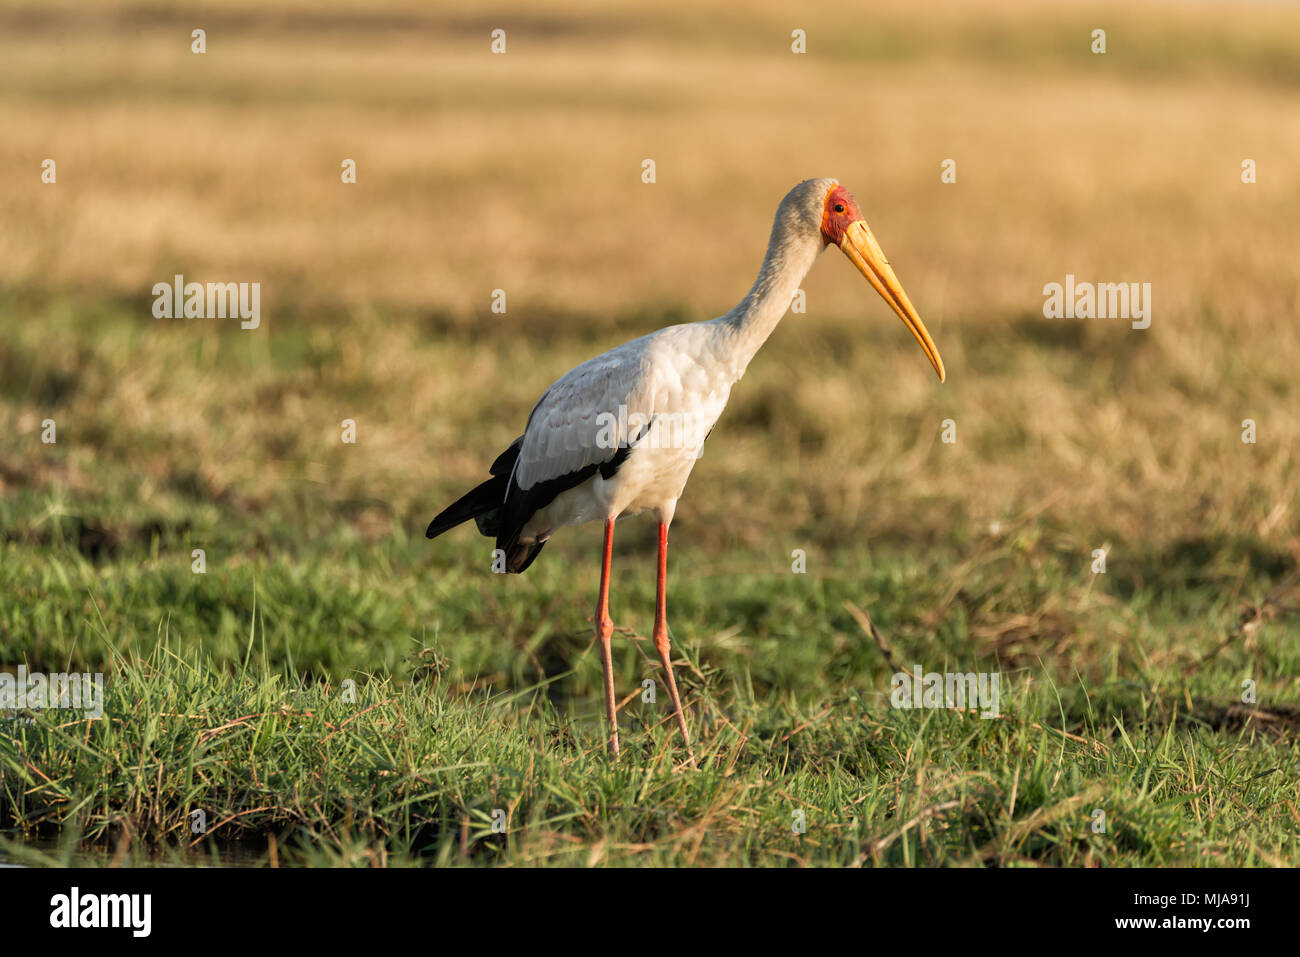 Yellow-billed stork (Mycteria ibis) looking for food on the bank of the Chobe river, Botswana Stock Photo